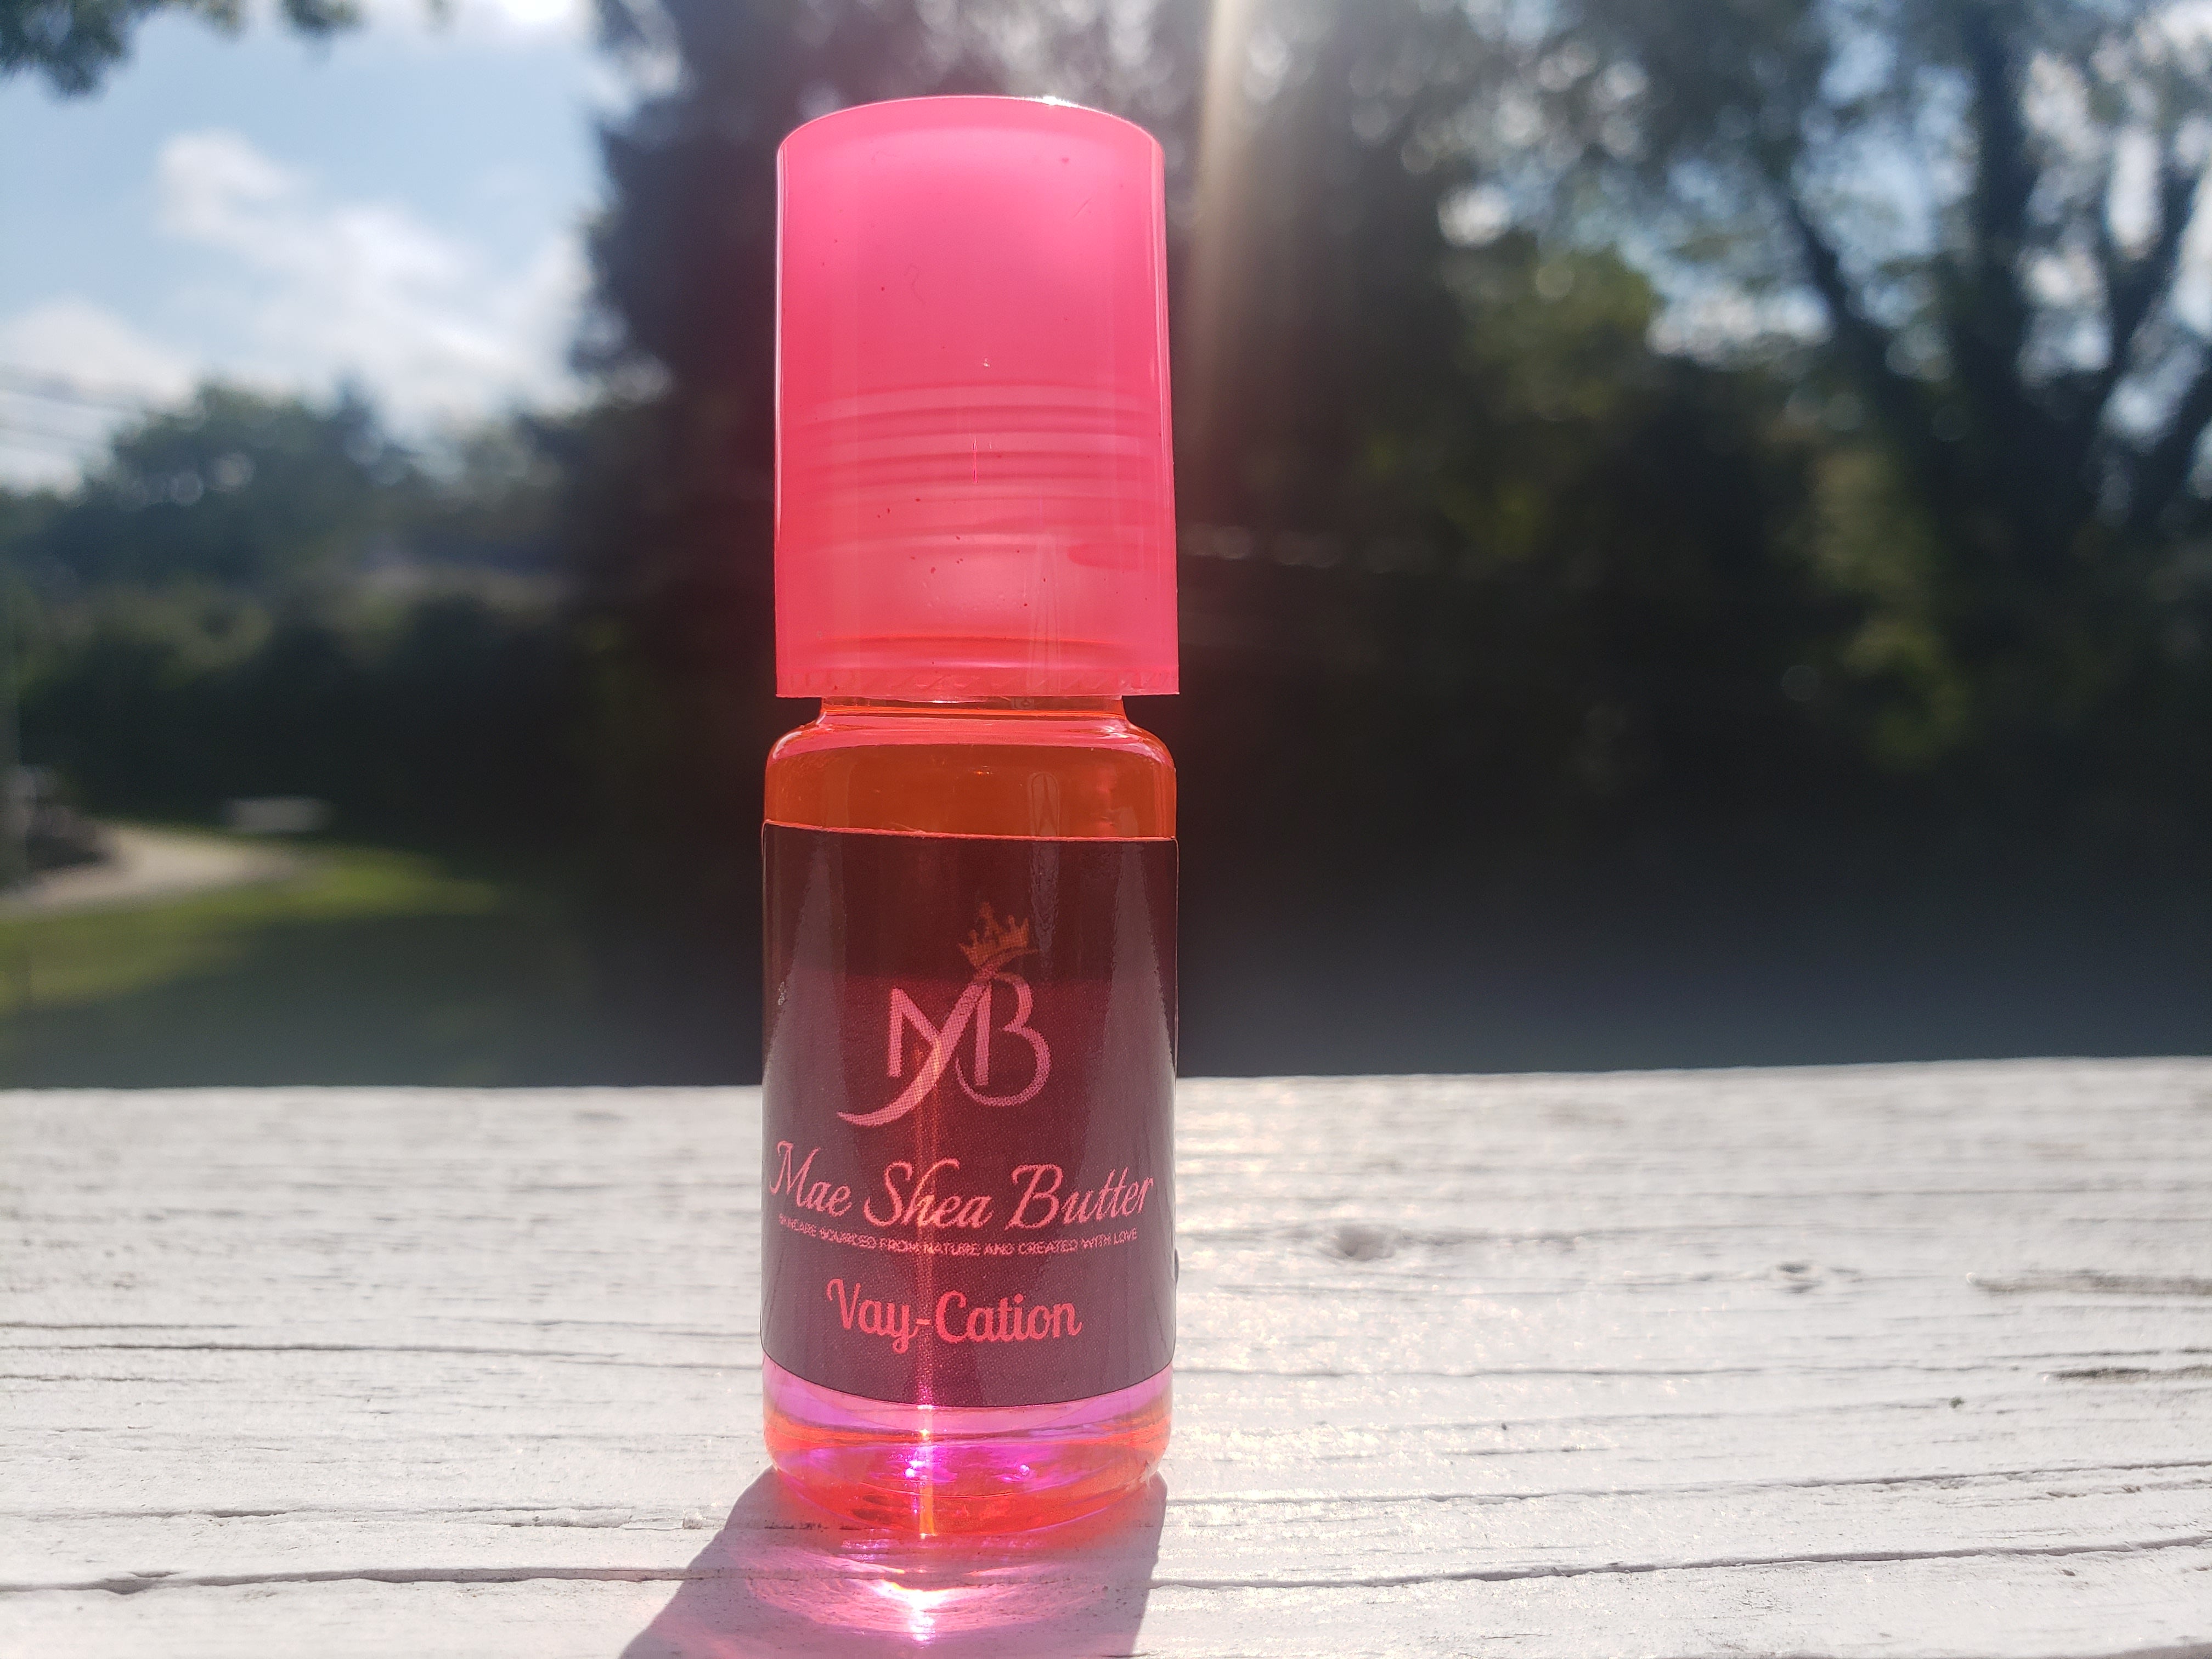 Vay-cation Scented Oil